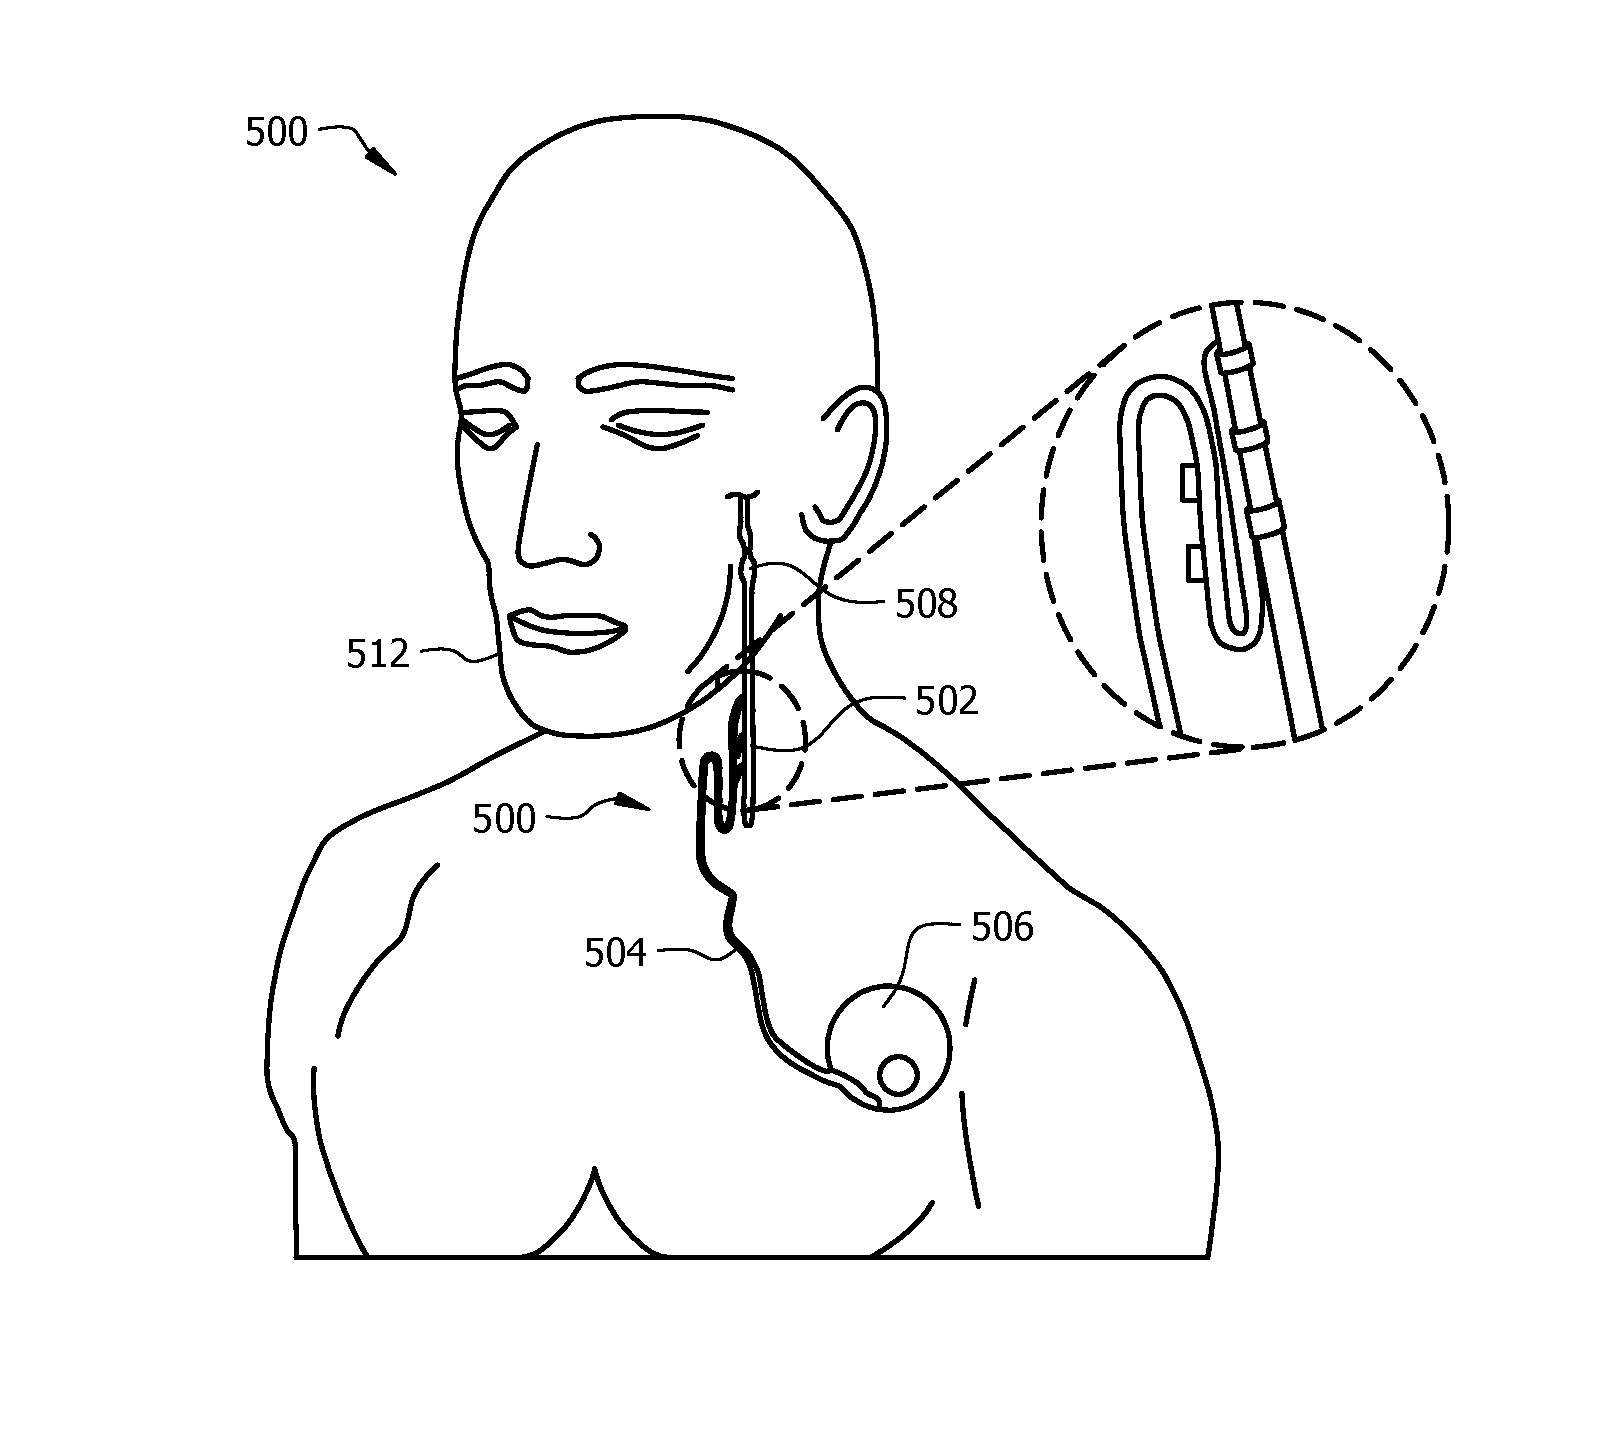 Methods, systems, and devices for pairing vagus nerve stimulation with motor therapy in stroke patients